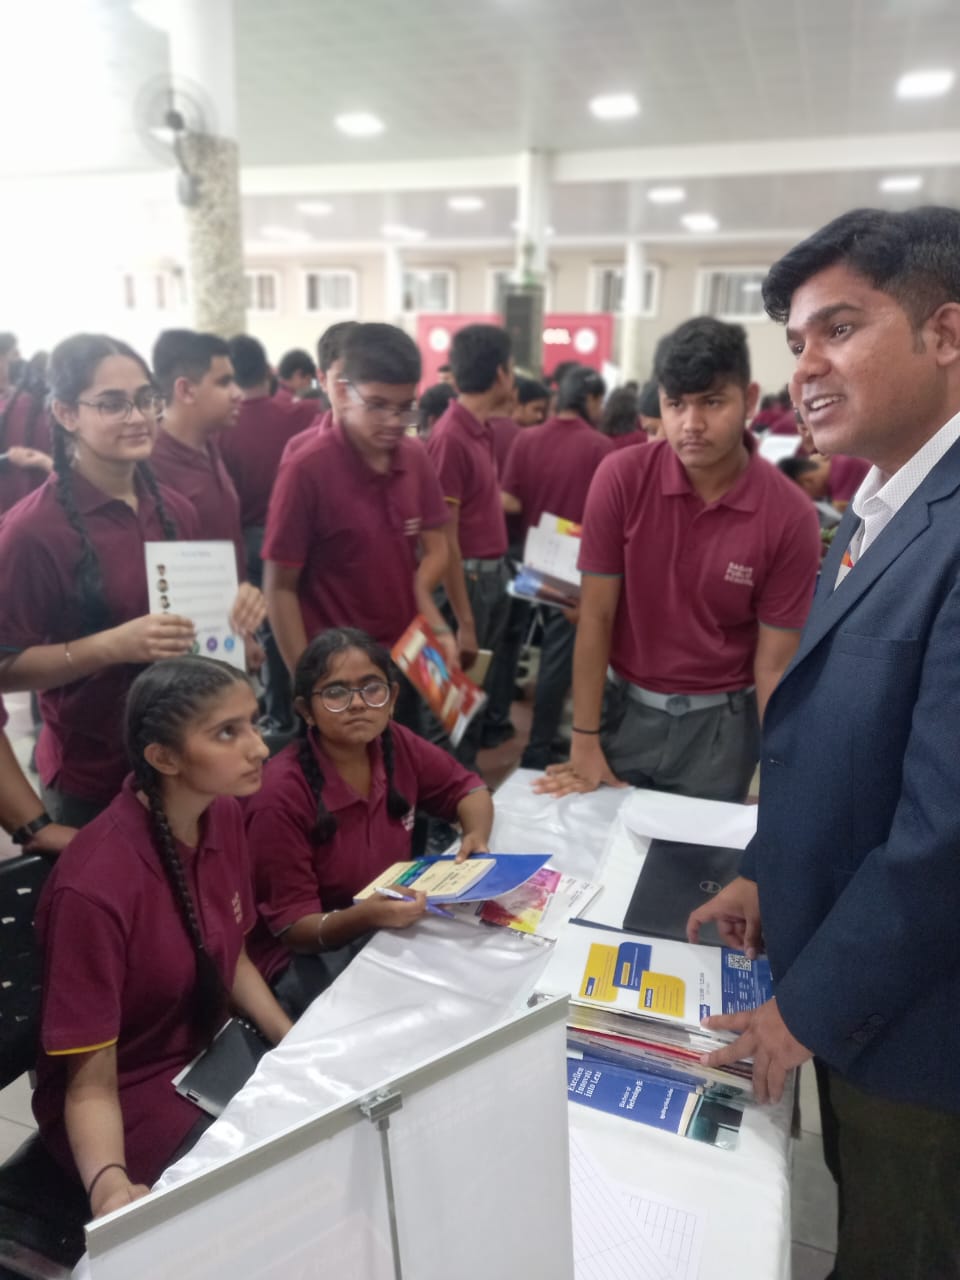 Sagarites of Classes X-XII attended a Career Fair